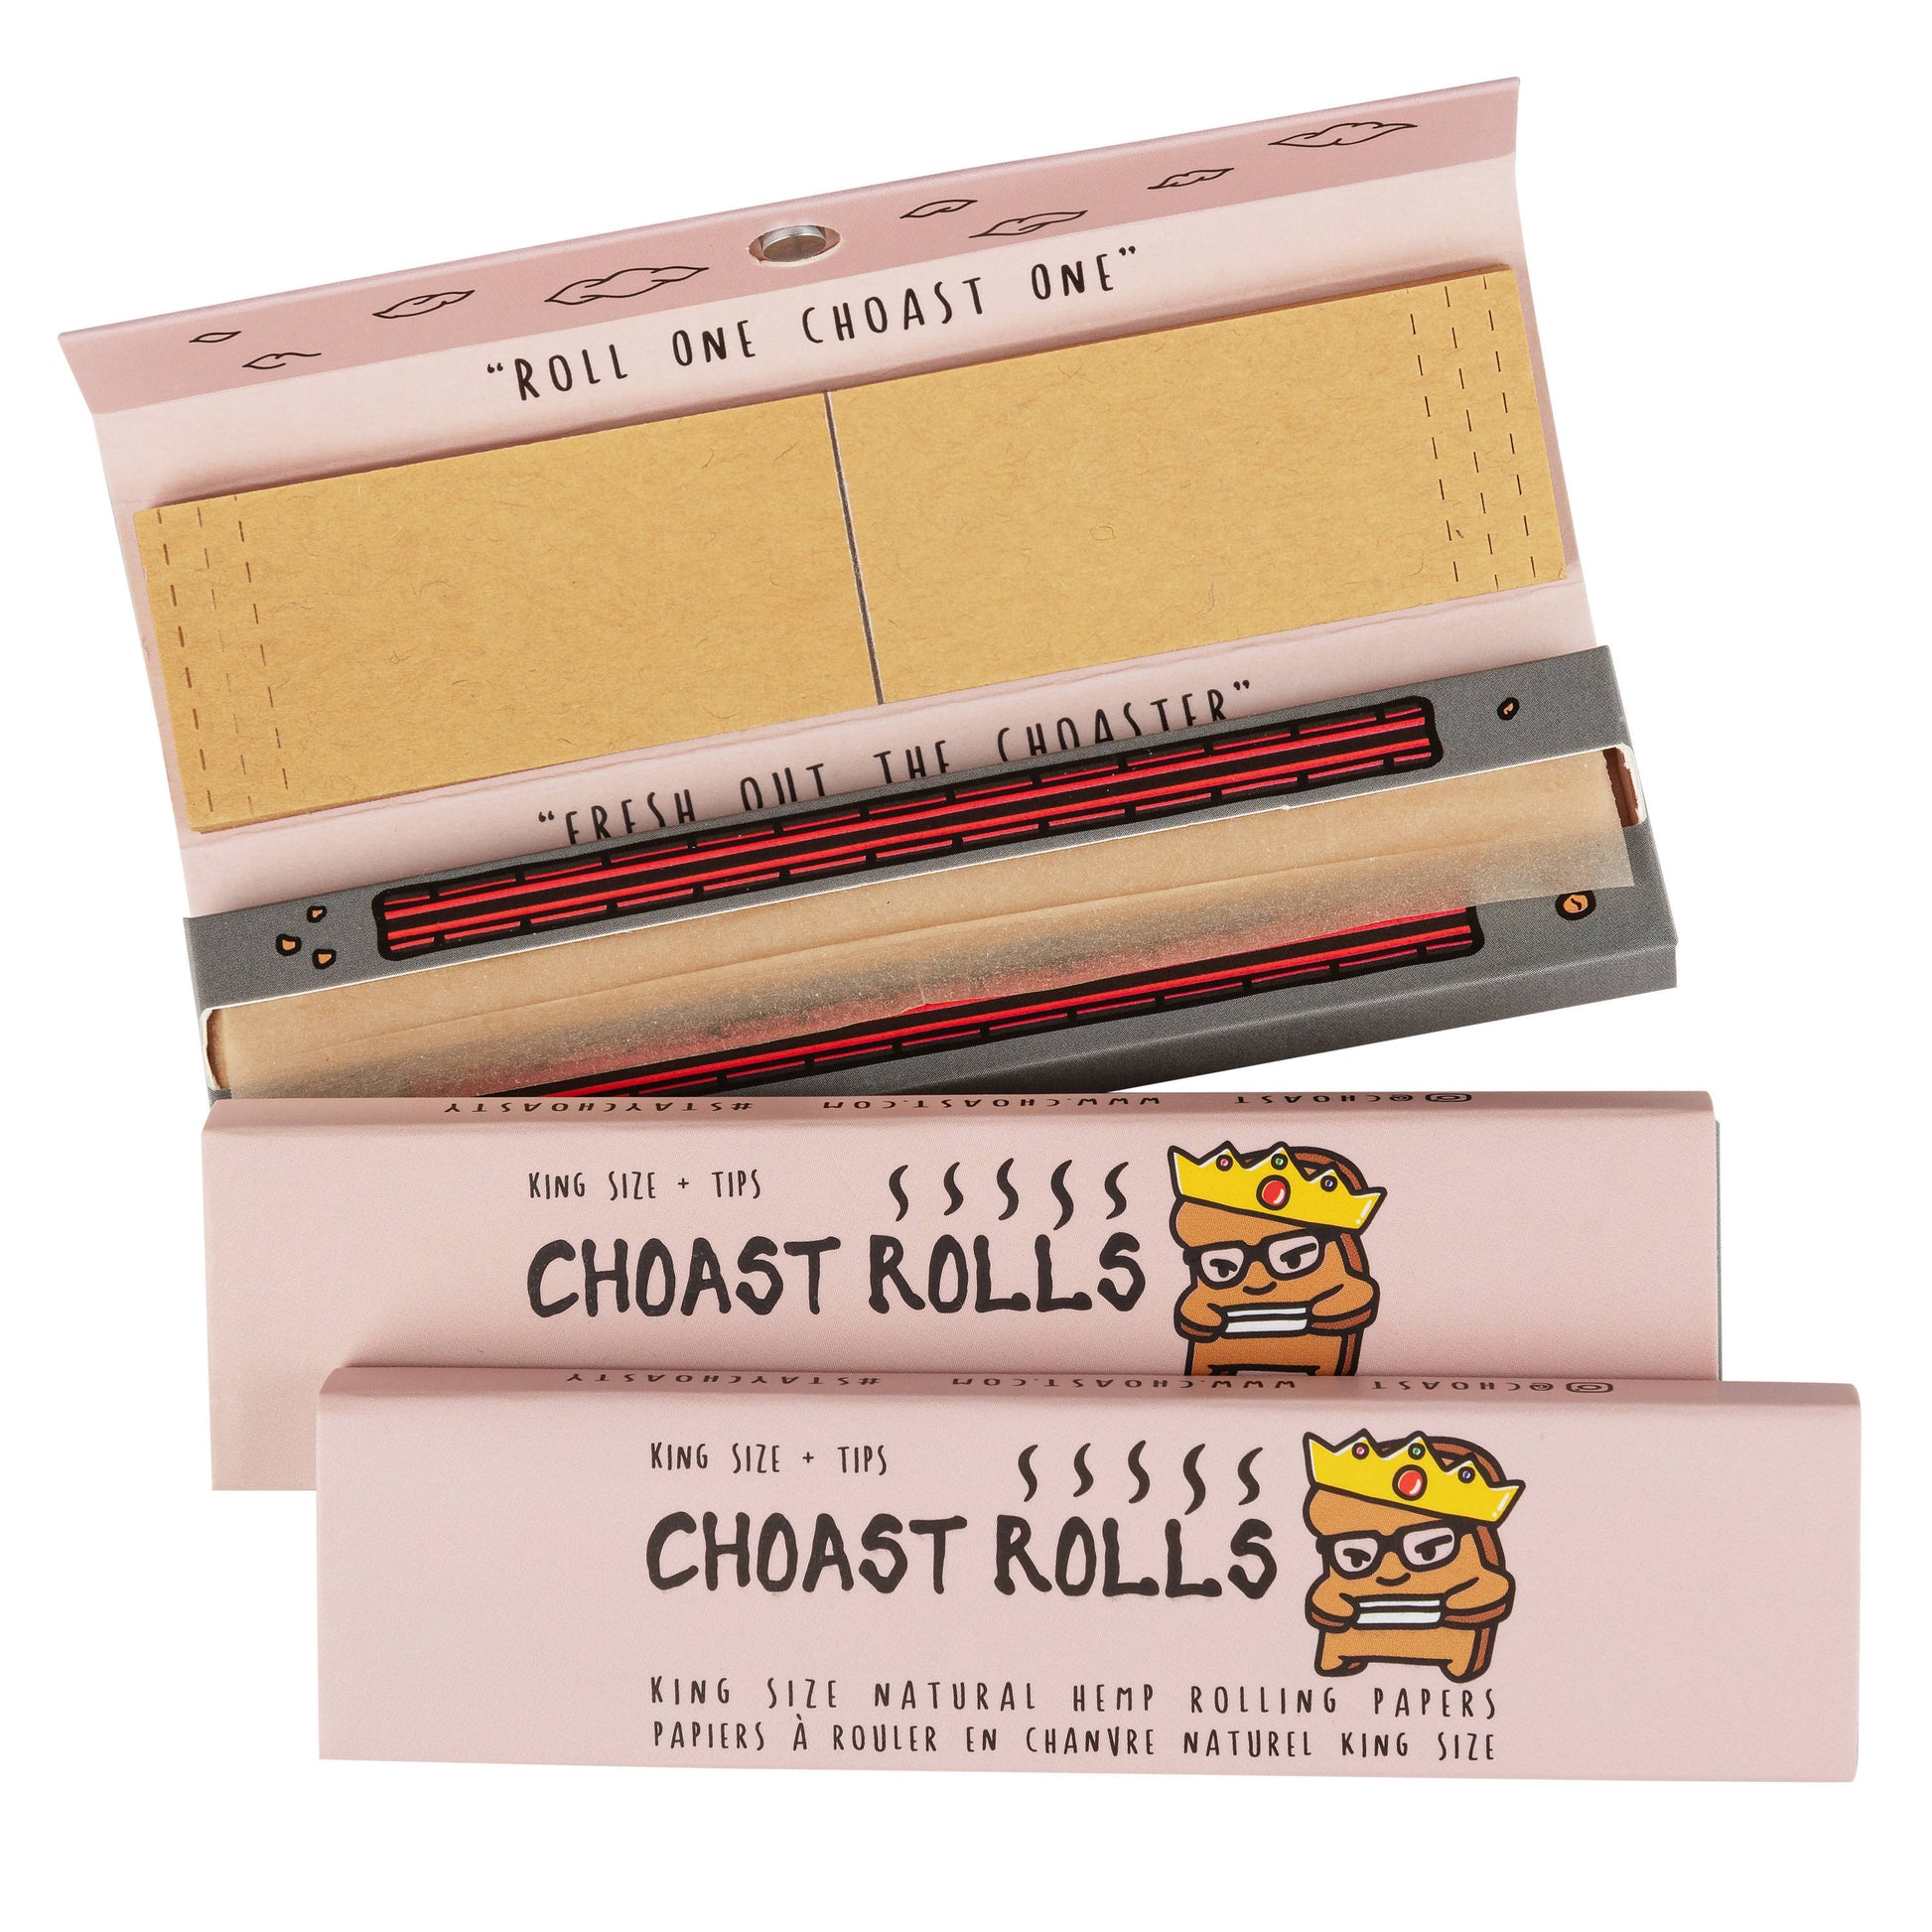 Natural Hemp Rolling Papers - Choast Rolls Kings, Carton of 22 booklets, - King Size Quality Rolling Papers with Filter Tips and Magnet Lid_1